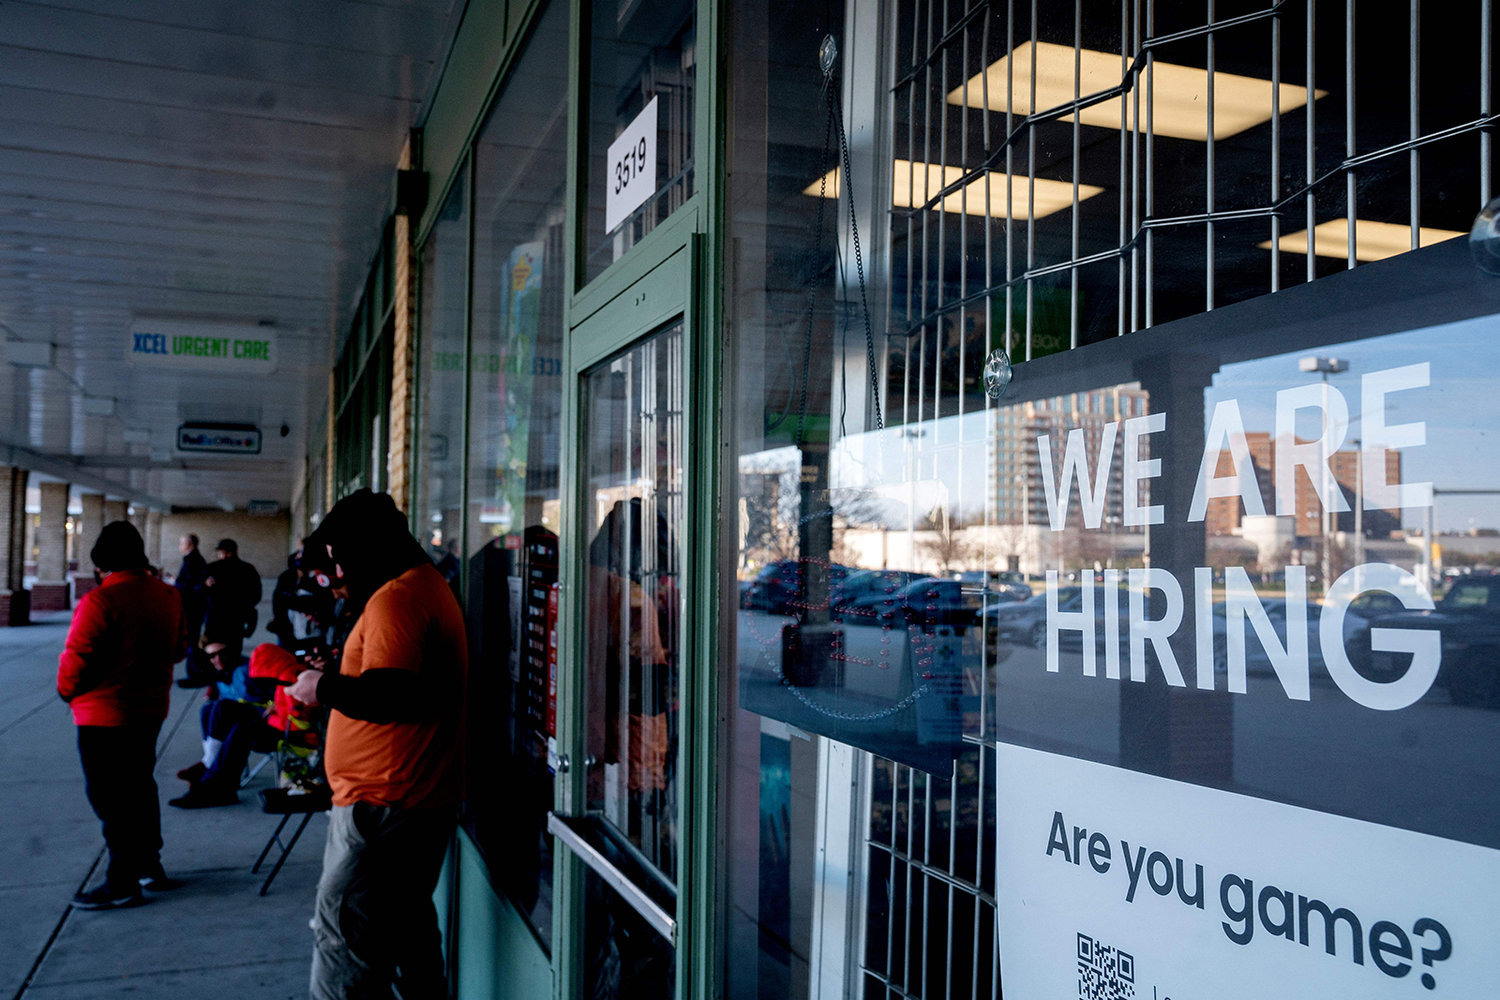 A "We Are Hiring" sign is displayed at a Game Stop in Baileys Crossroads, Virginia, on April 2, 2022. (Stefani Reynolds/AFP via Getty Images/TNS)